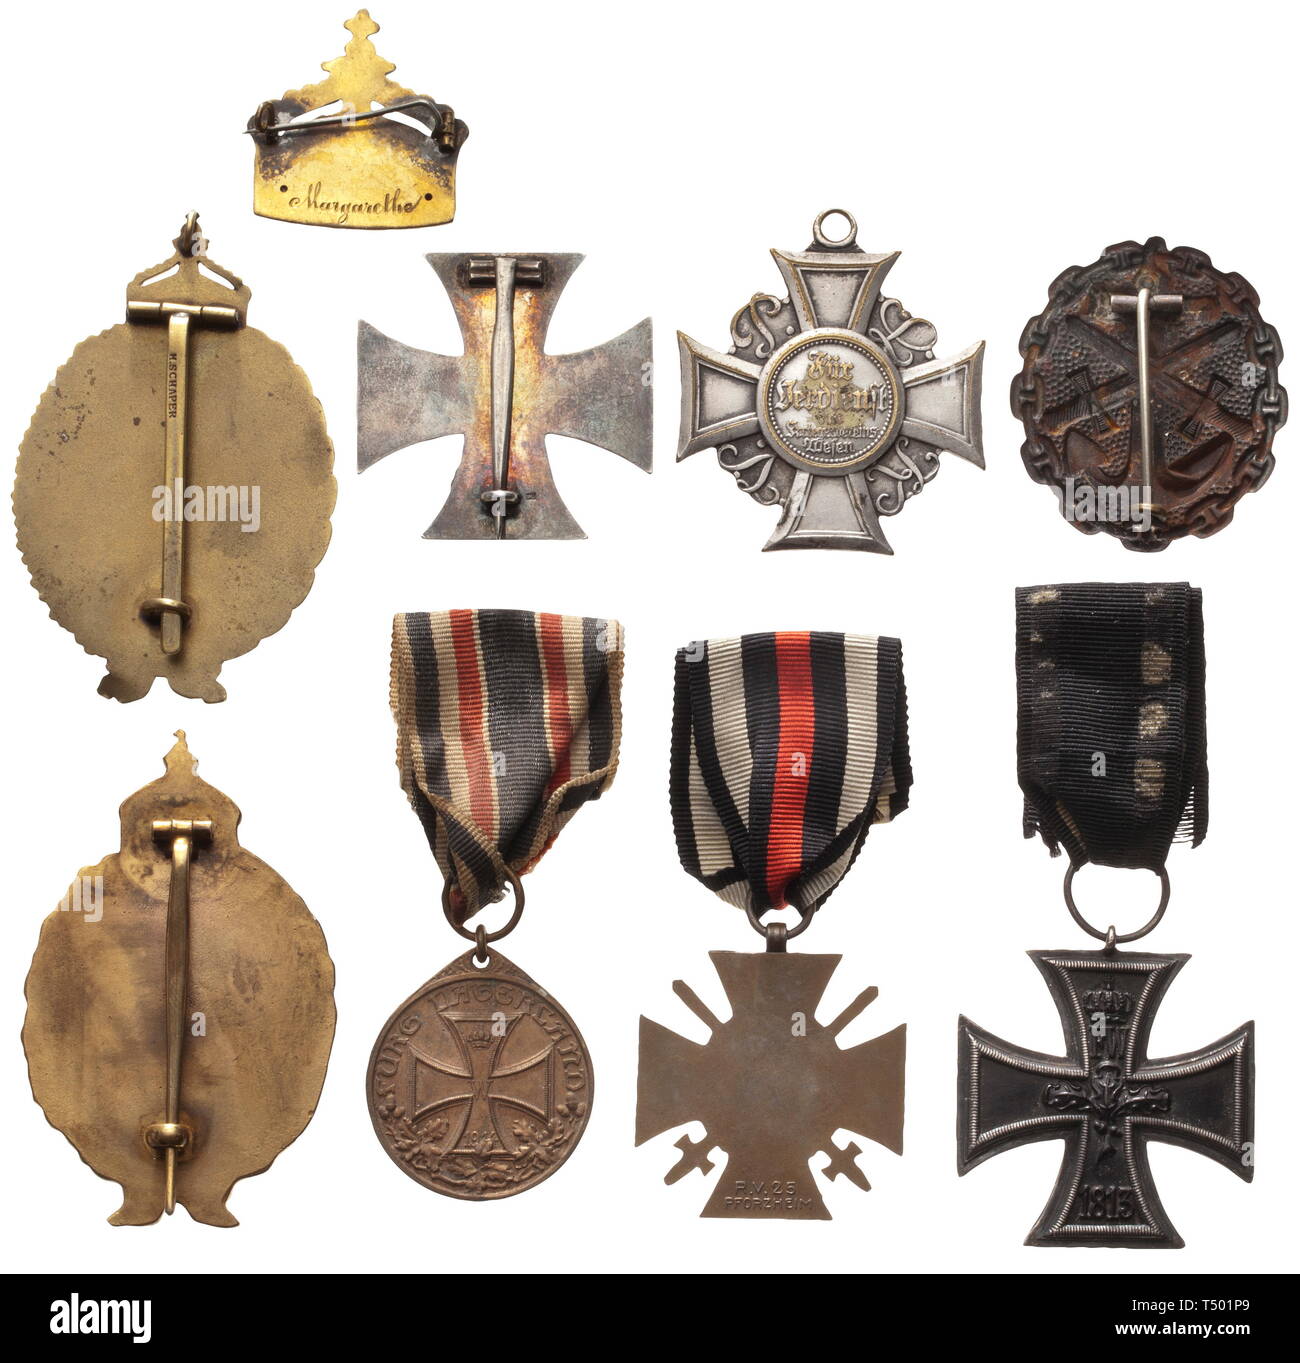 A naval flyer's group - orders and photo albums. Two Badges for a Naval Seaplane Pilot, one in gilt non-ferrous metal, solid issue with perforate crown, the wide attachment pin with maker's mark 'H. Schaper', additional eyelets above, weight 47.0 g, dimensions 46.5 x 72.2 cm. The second Badge as previous, with closed crown, no maker's mark, weight 42.5 g, dimensions 44.5 x 70.7 cm, instituted in May 1915 (Nie 1.01.24.3). Also, an Iron Cross 1st and 2nd Class of 1914 and four further decorations. A hollow metal crown made into a brooch with engraved name 'Margarethe'. Includ, Editorial-Use-Only Stock Photo